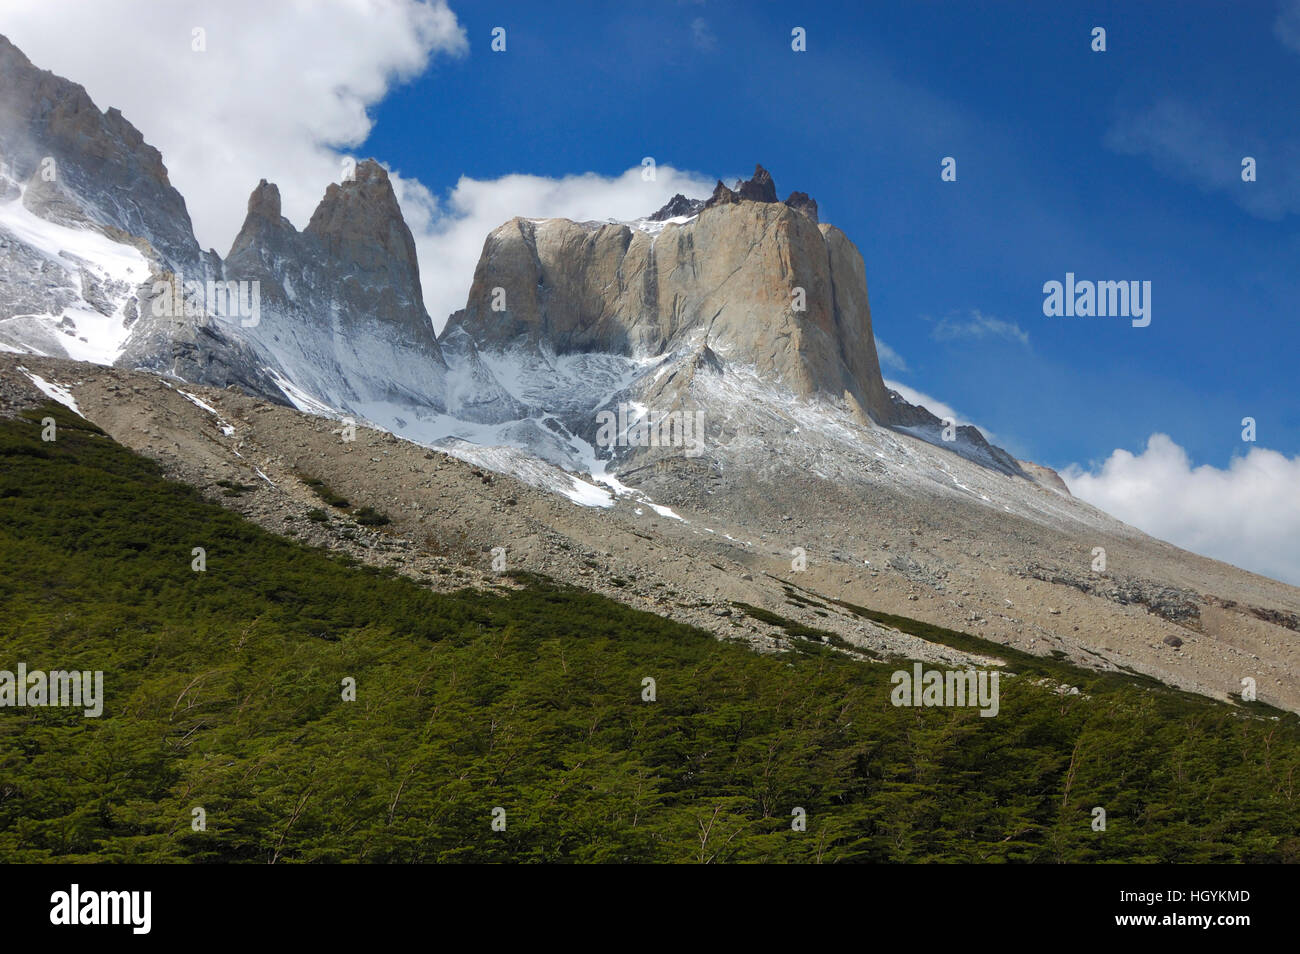 Cuernos del Paine in the clouds seen from Valle del Frances, Torres del Paine National Park, Patagonia, Chile (Torres del Peine) Stock Photo